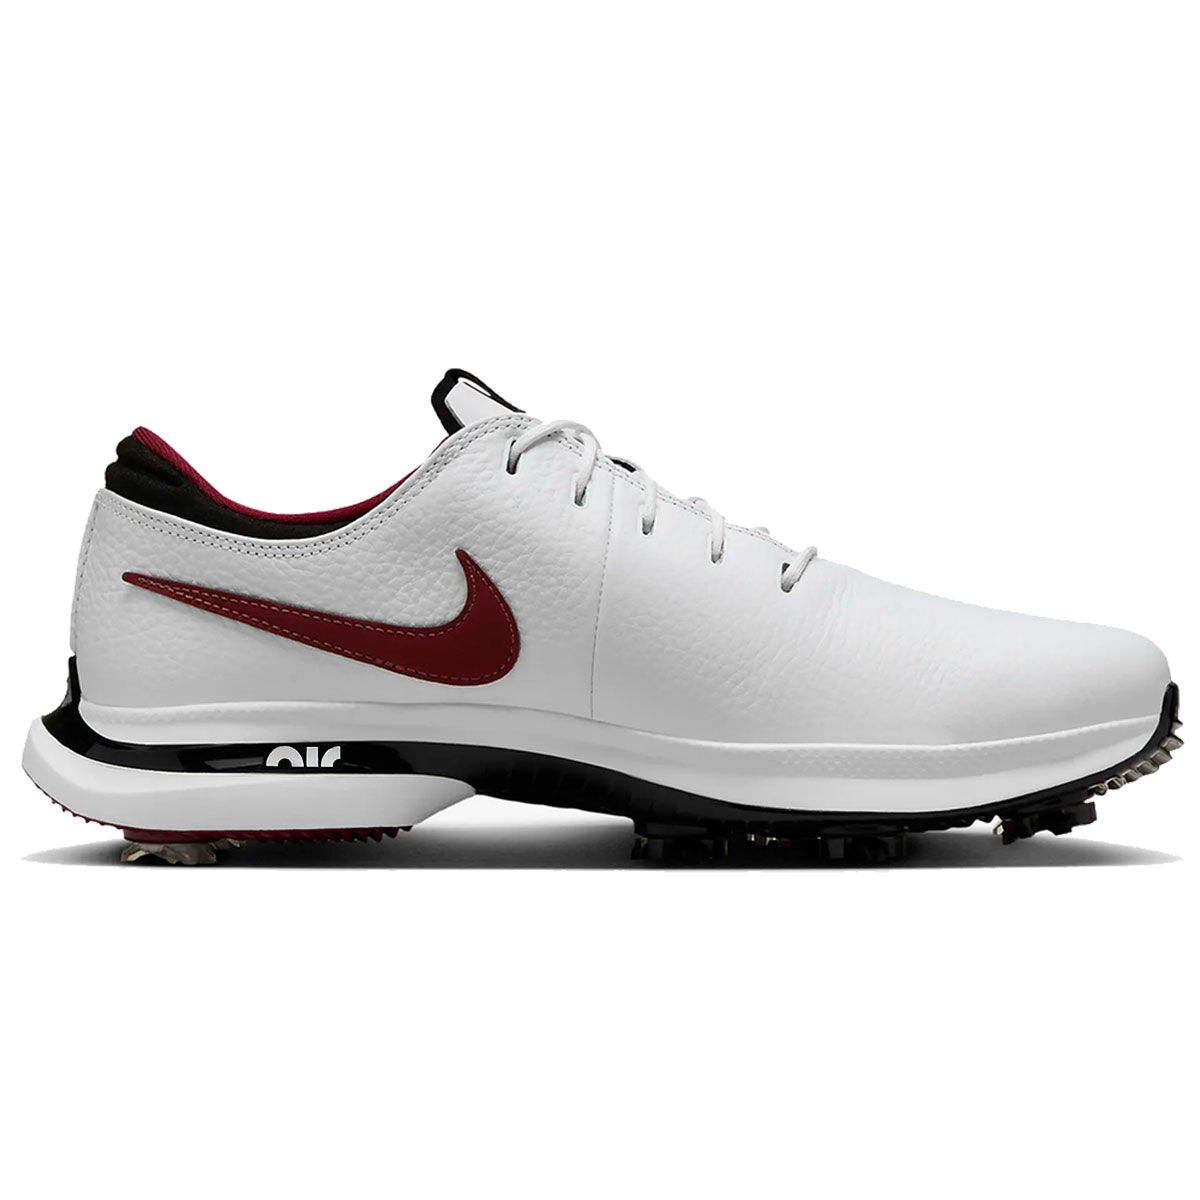 Nike Air Zoom Victory Tour 3 Waterproof Spiked Golf Shoes, Mens, White/red/black, 8 | American Golf von Nike Golf